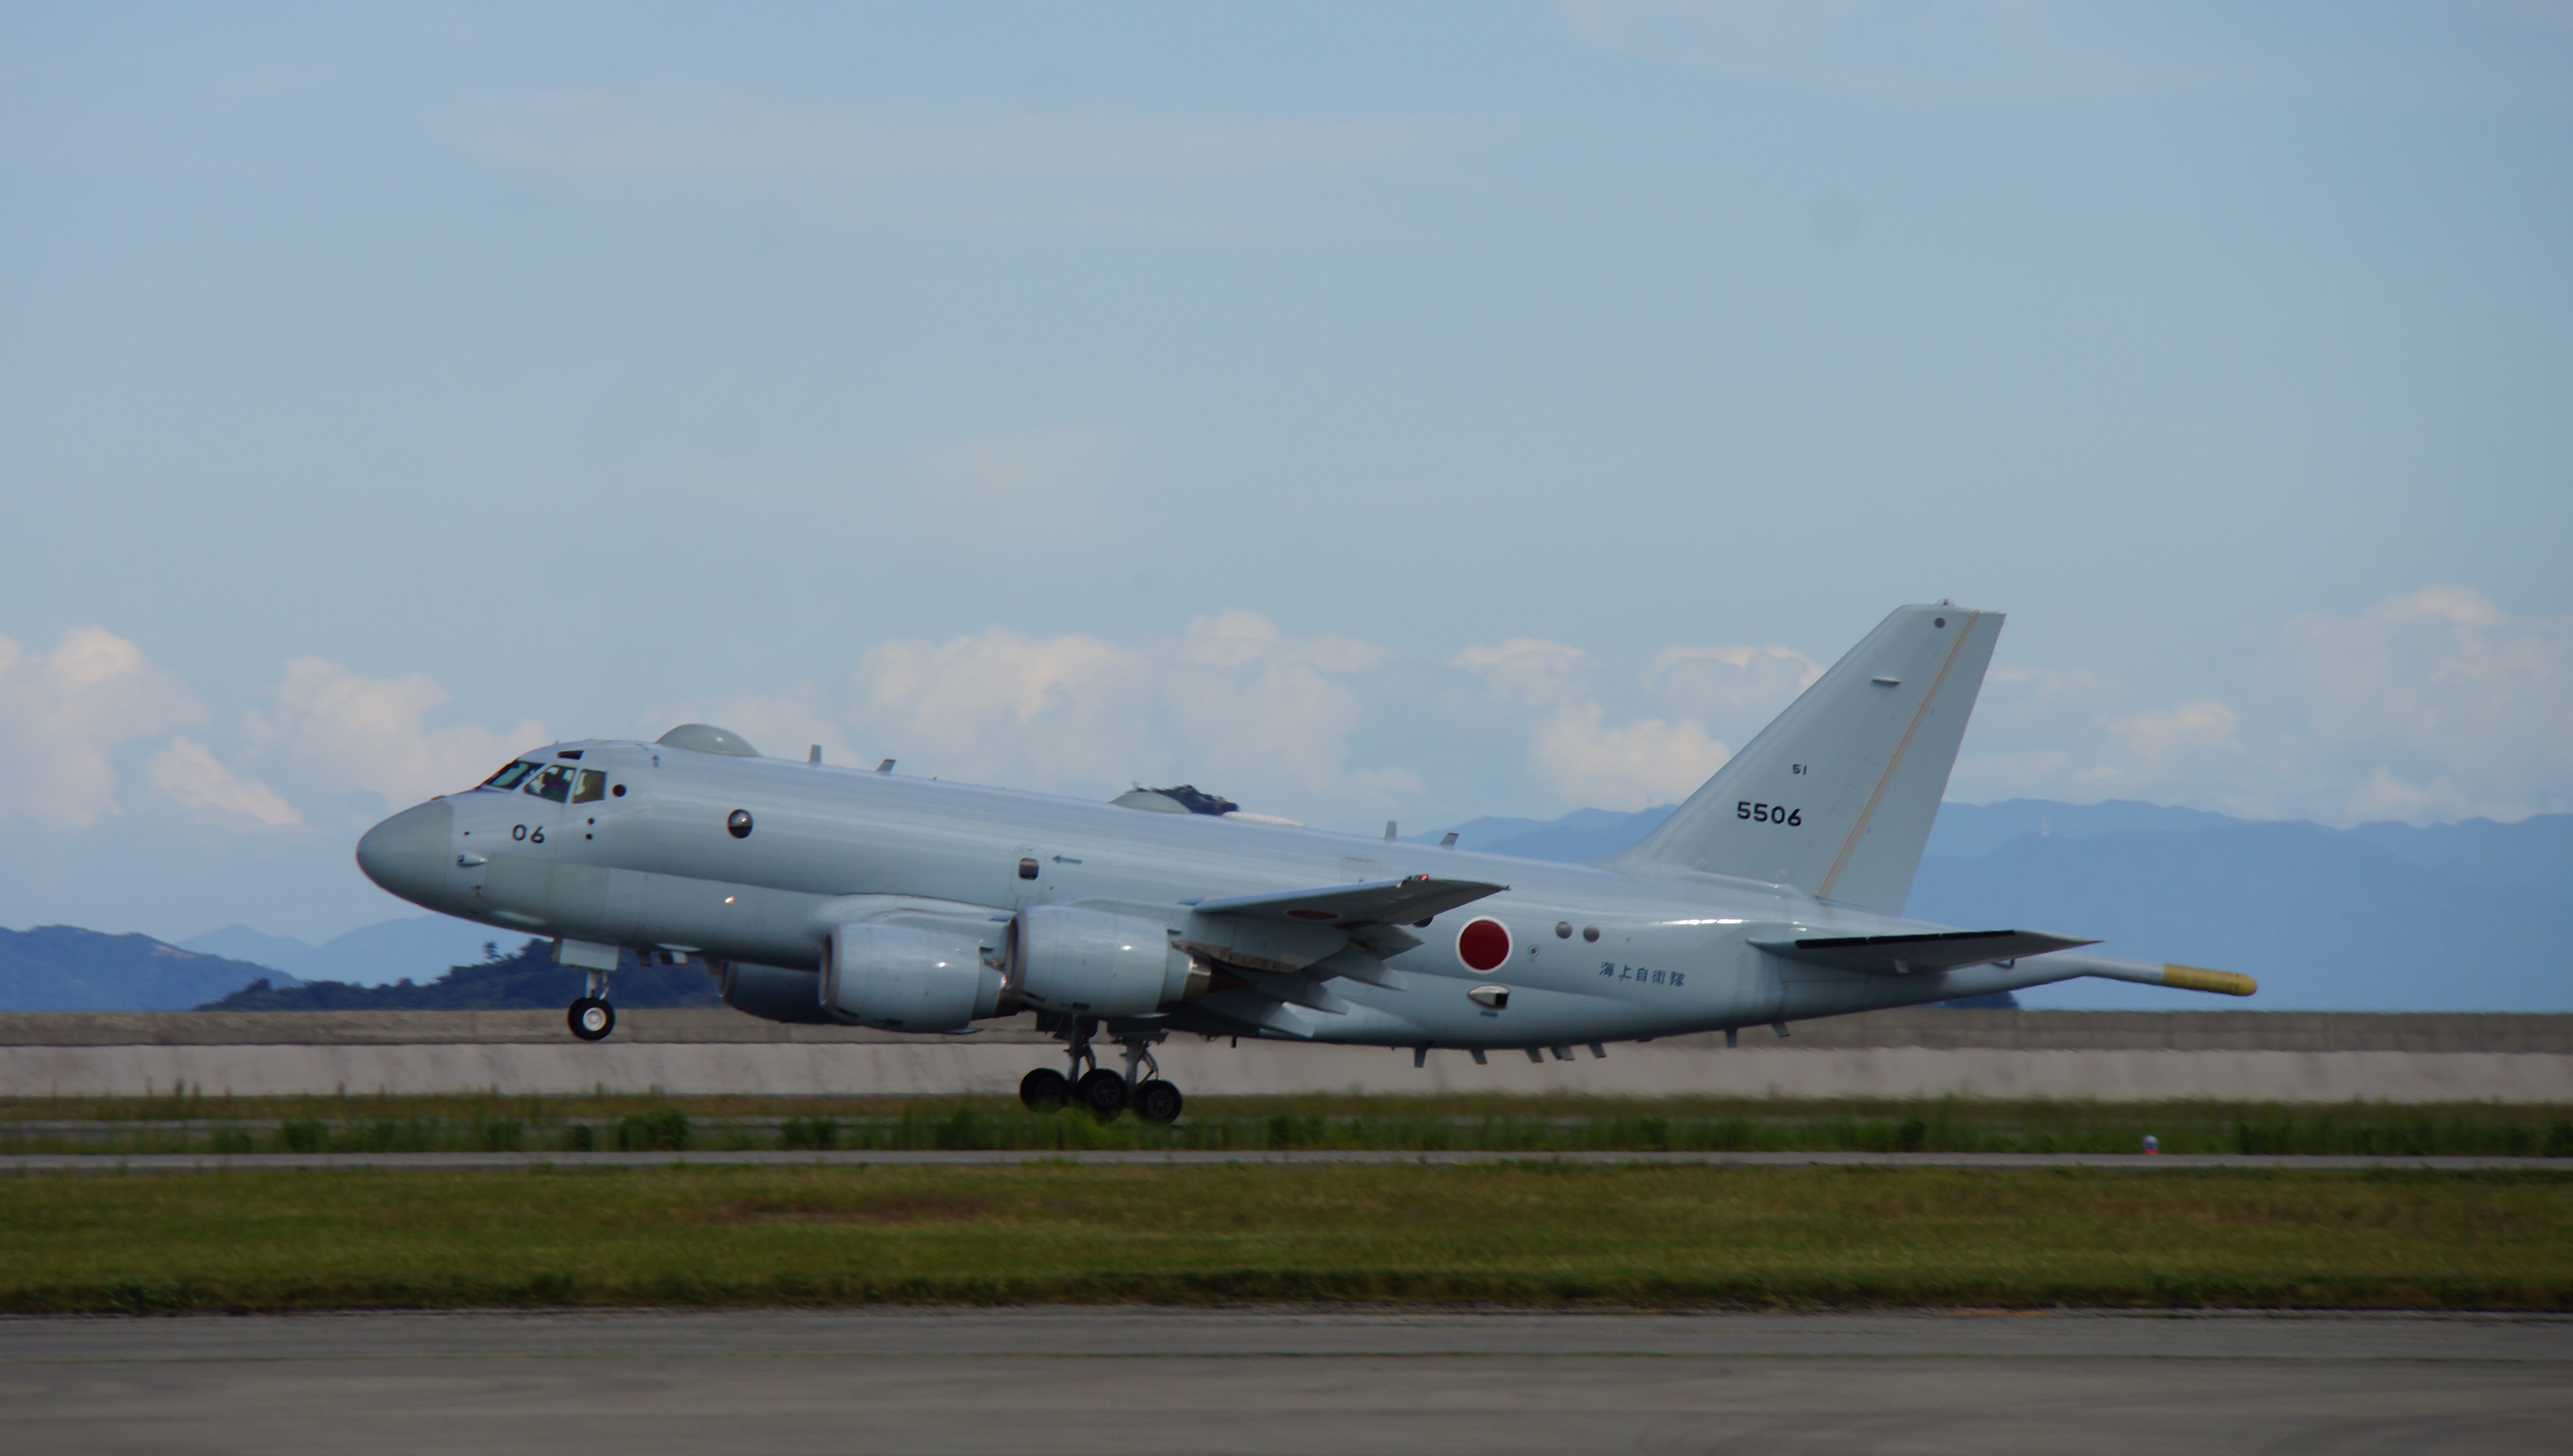 JMSDF_P-1%285506%29_which_takes_off_from_Iwakuni_Air_Base_20140914.JPG